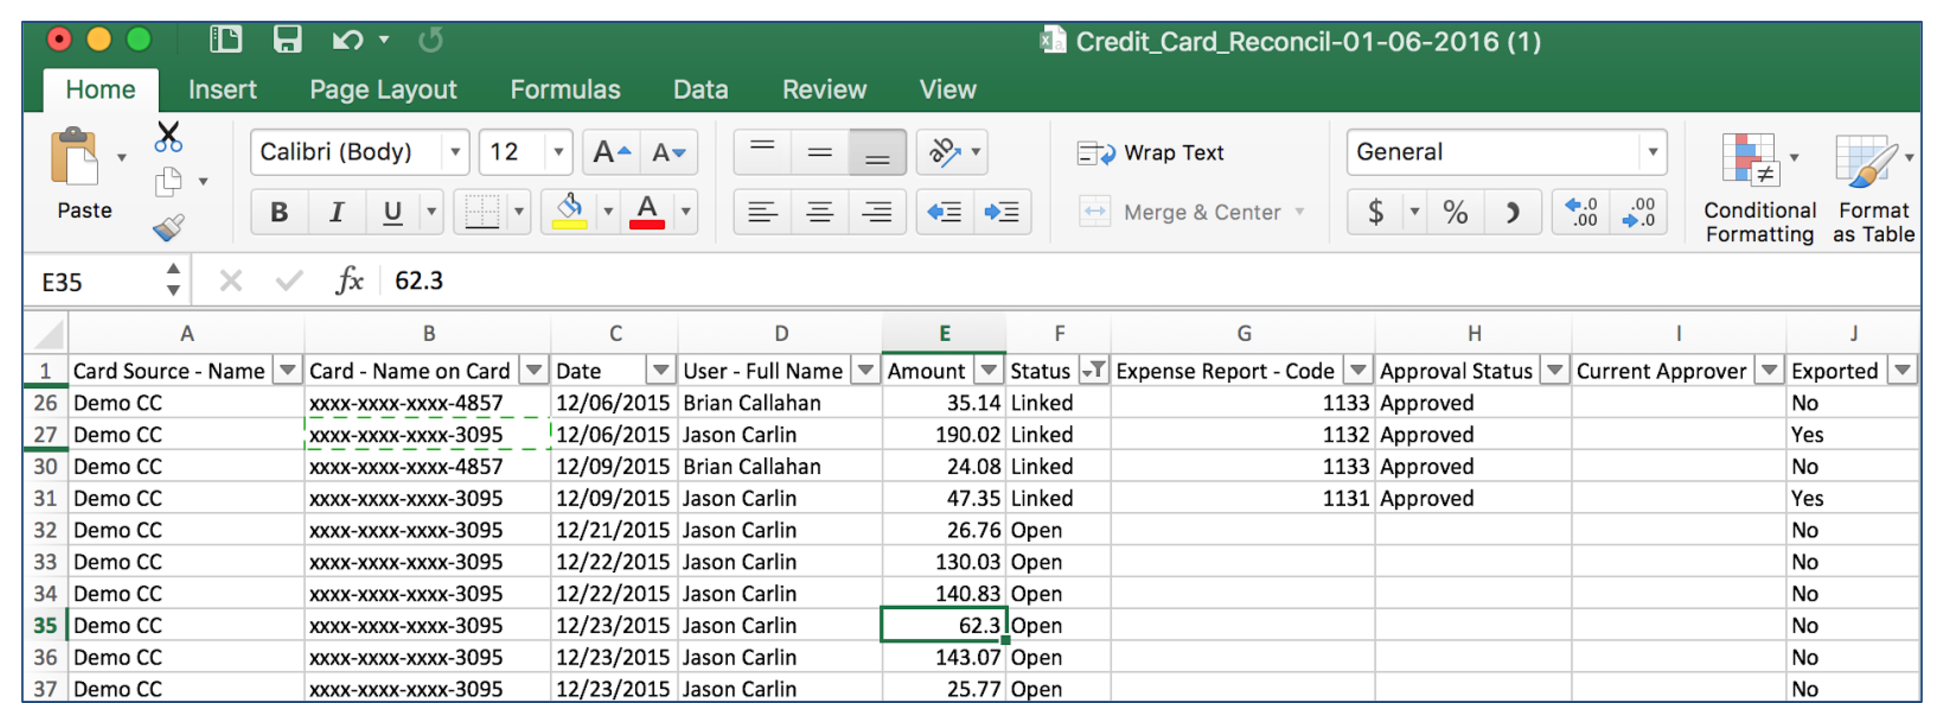 Document Of Credit Card Reconciliation Template In Excel In Credit Card Reconciliation Template In Excel Template